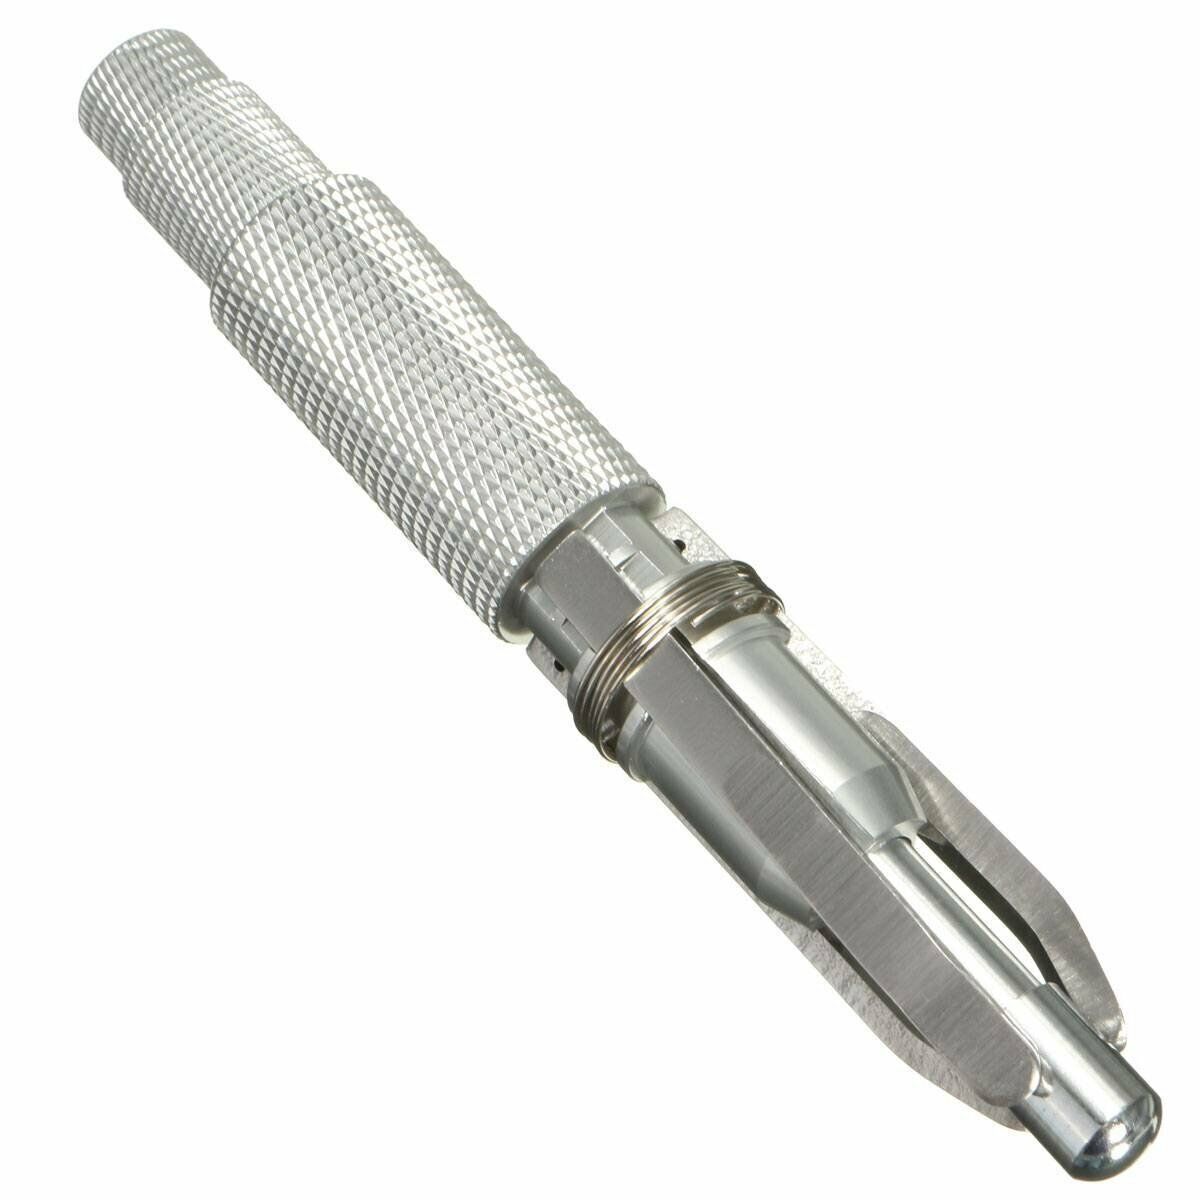 Senior Pipe Reamer Cleaning Tool Adjustable w/ Shank Drill Bit 